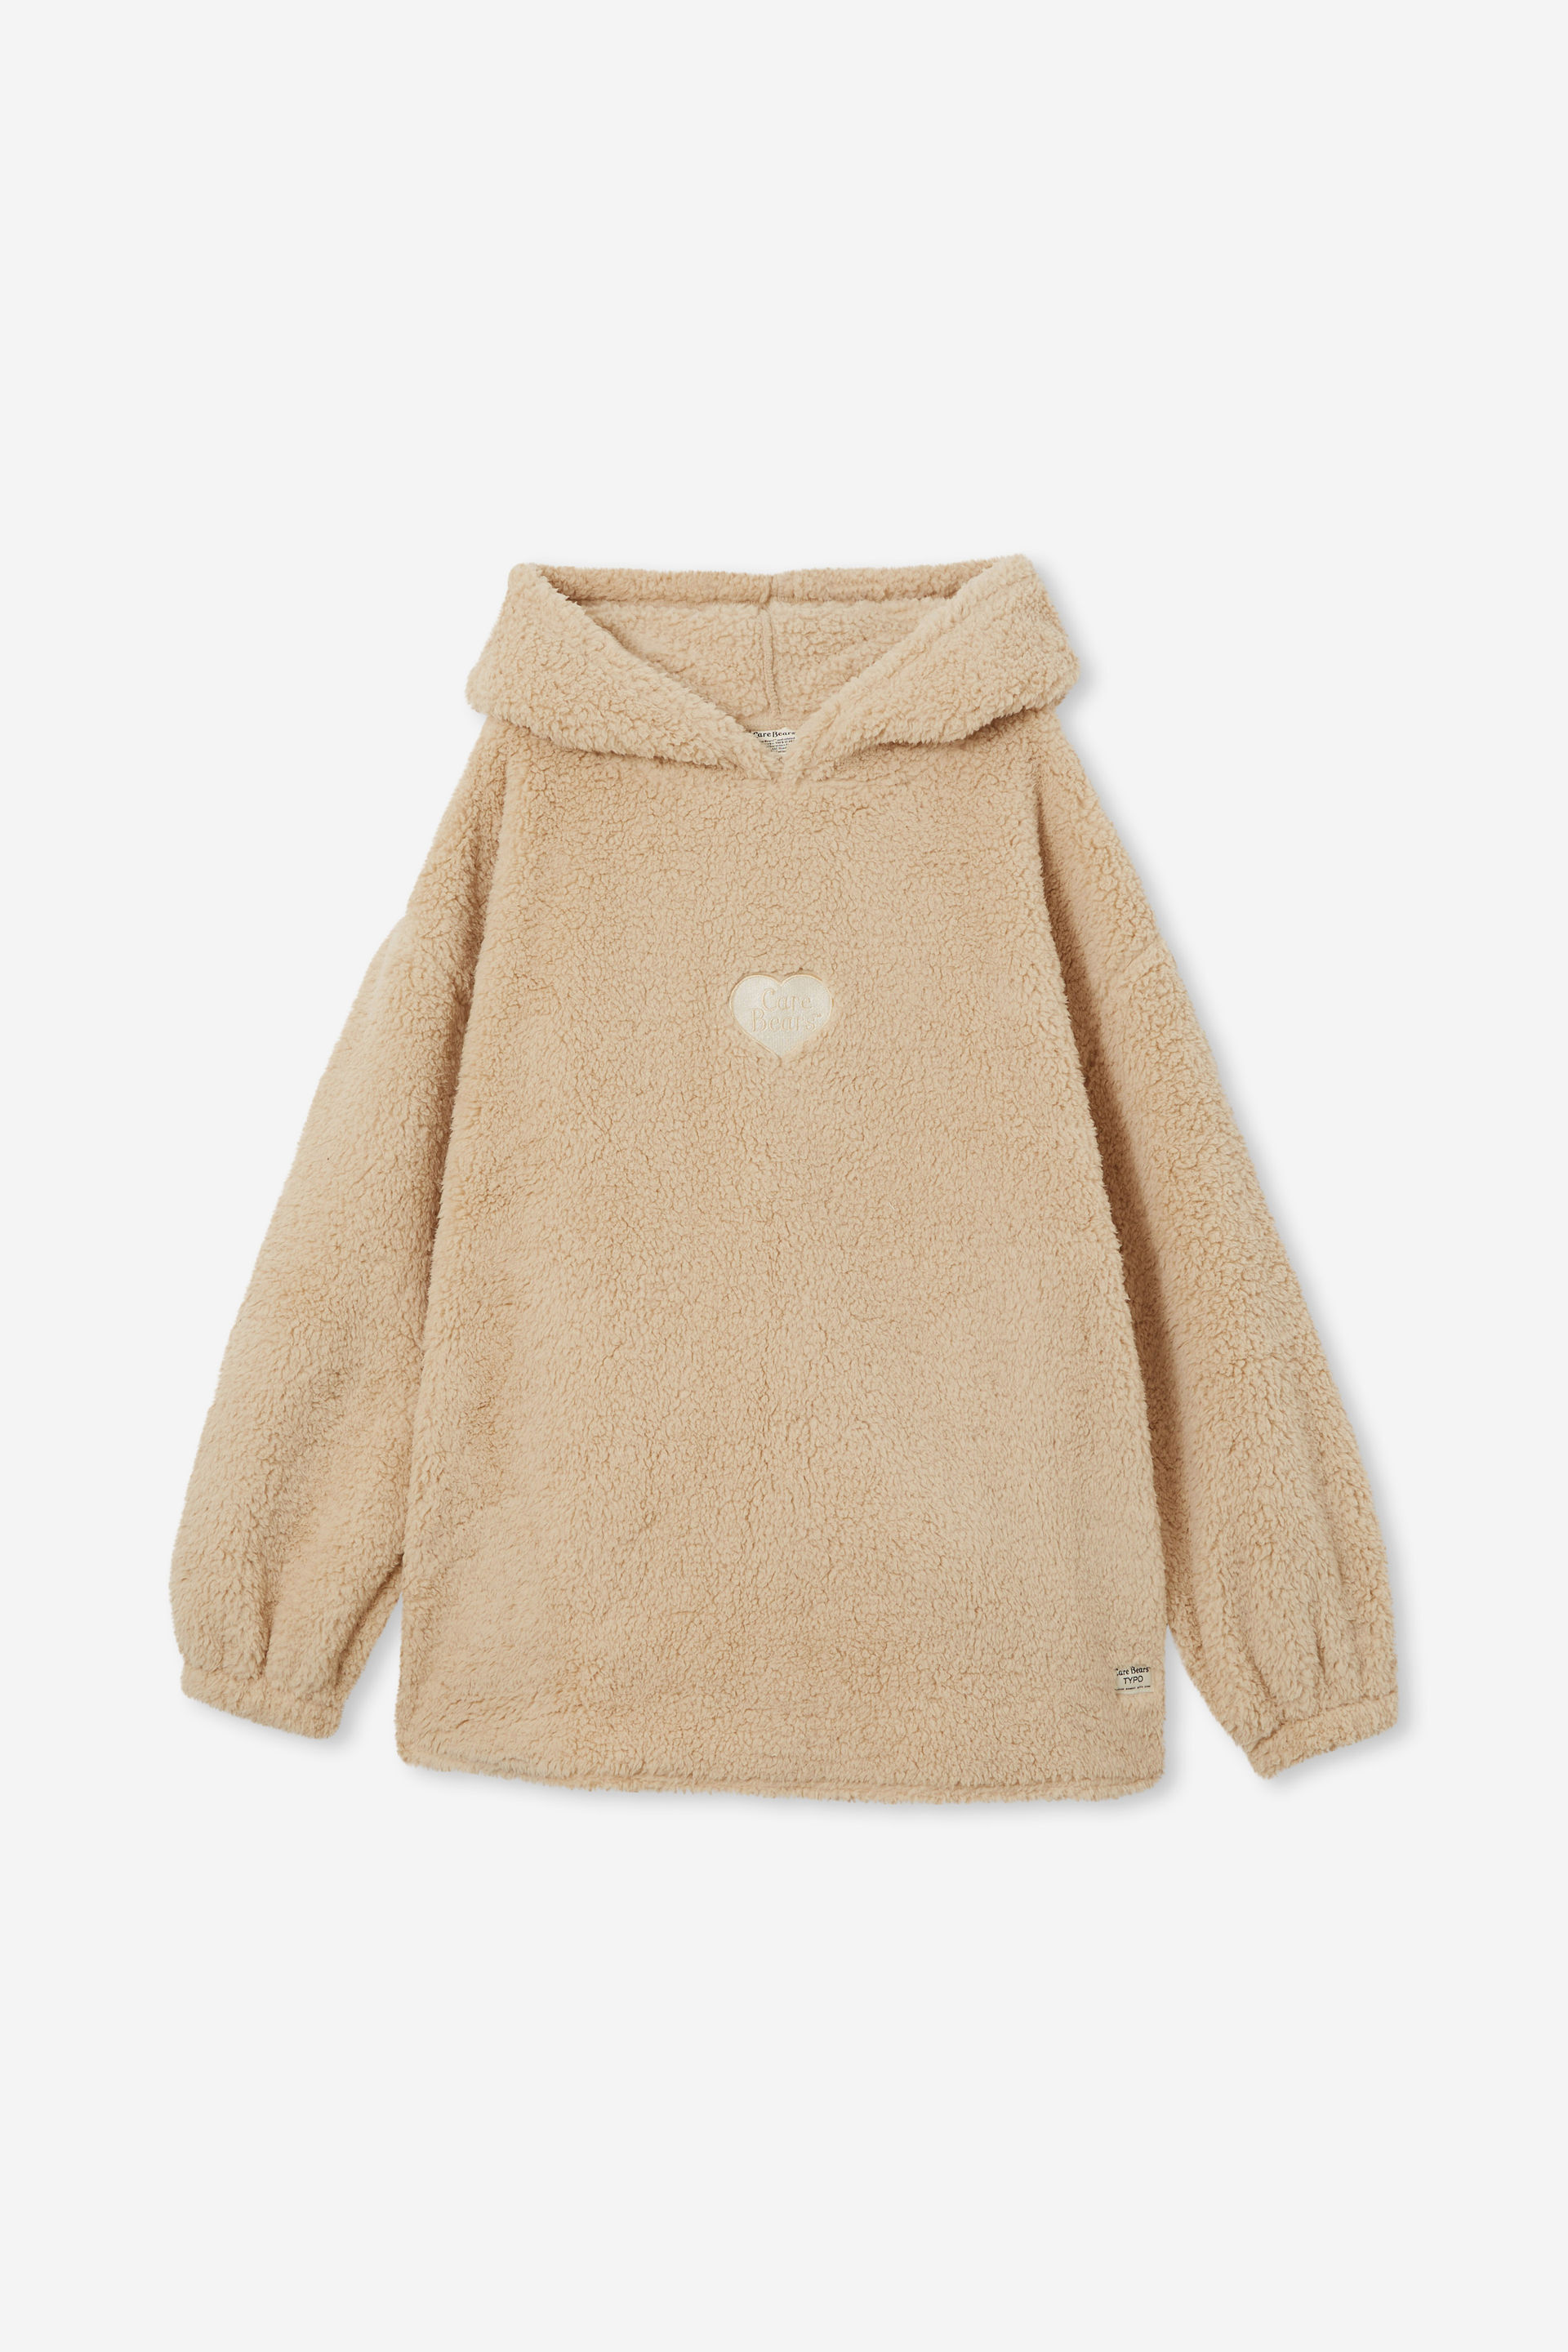 Collab Teddy Slounge Around Oversized Hoodie